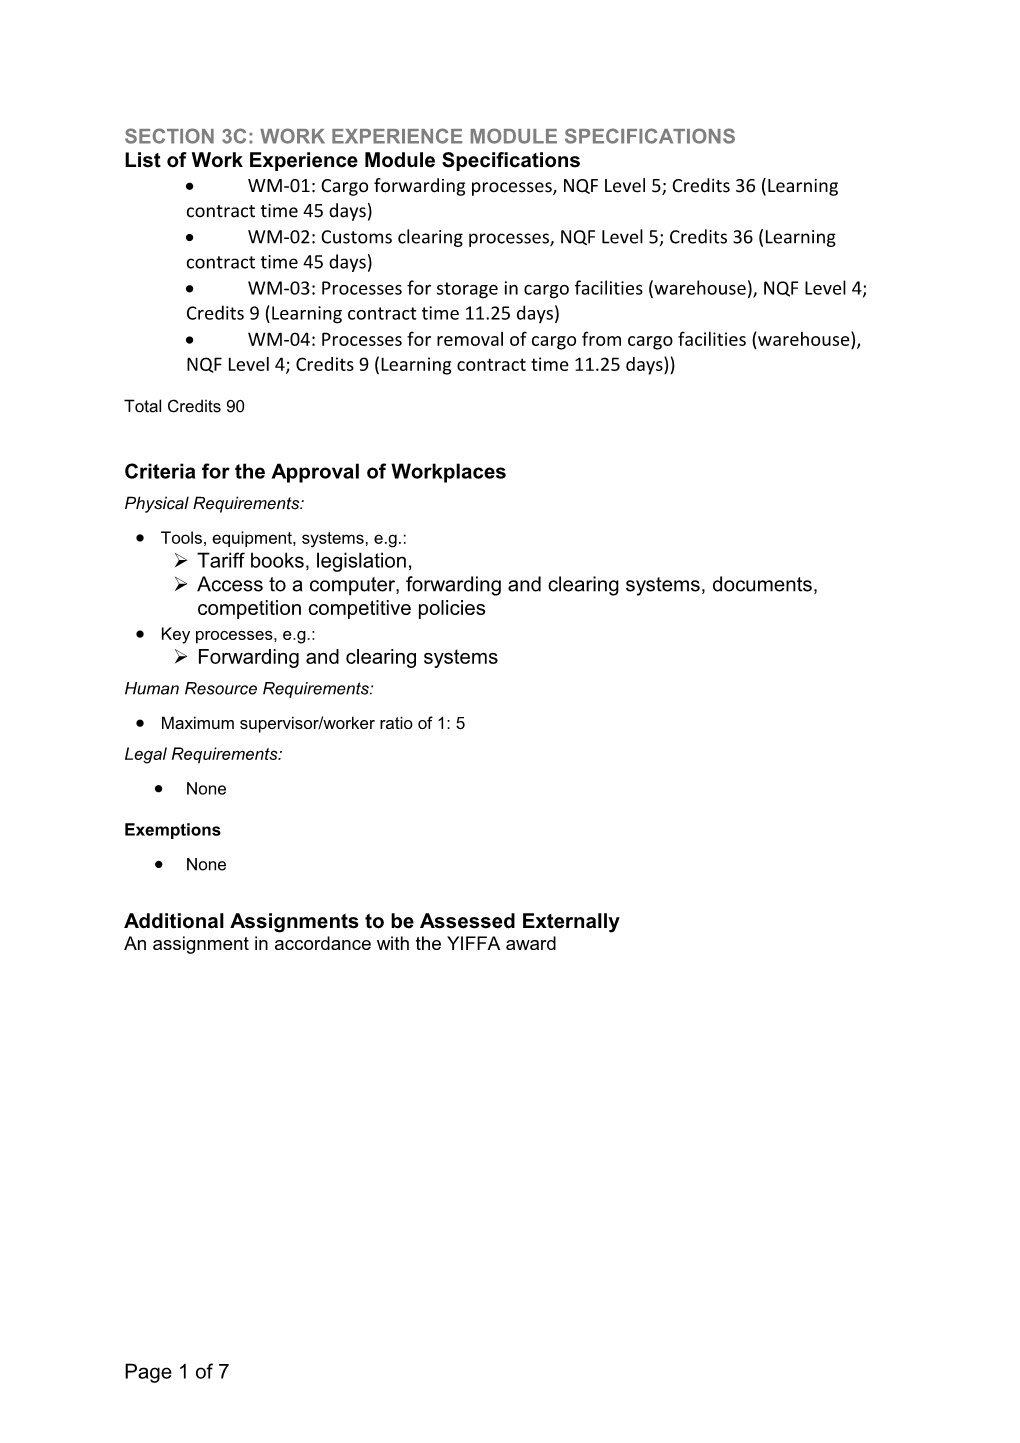 Section 3C: Work Experience Module Specifications